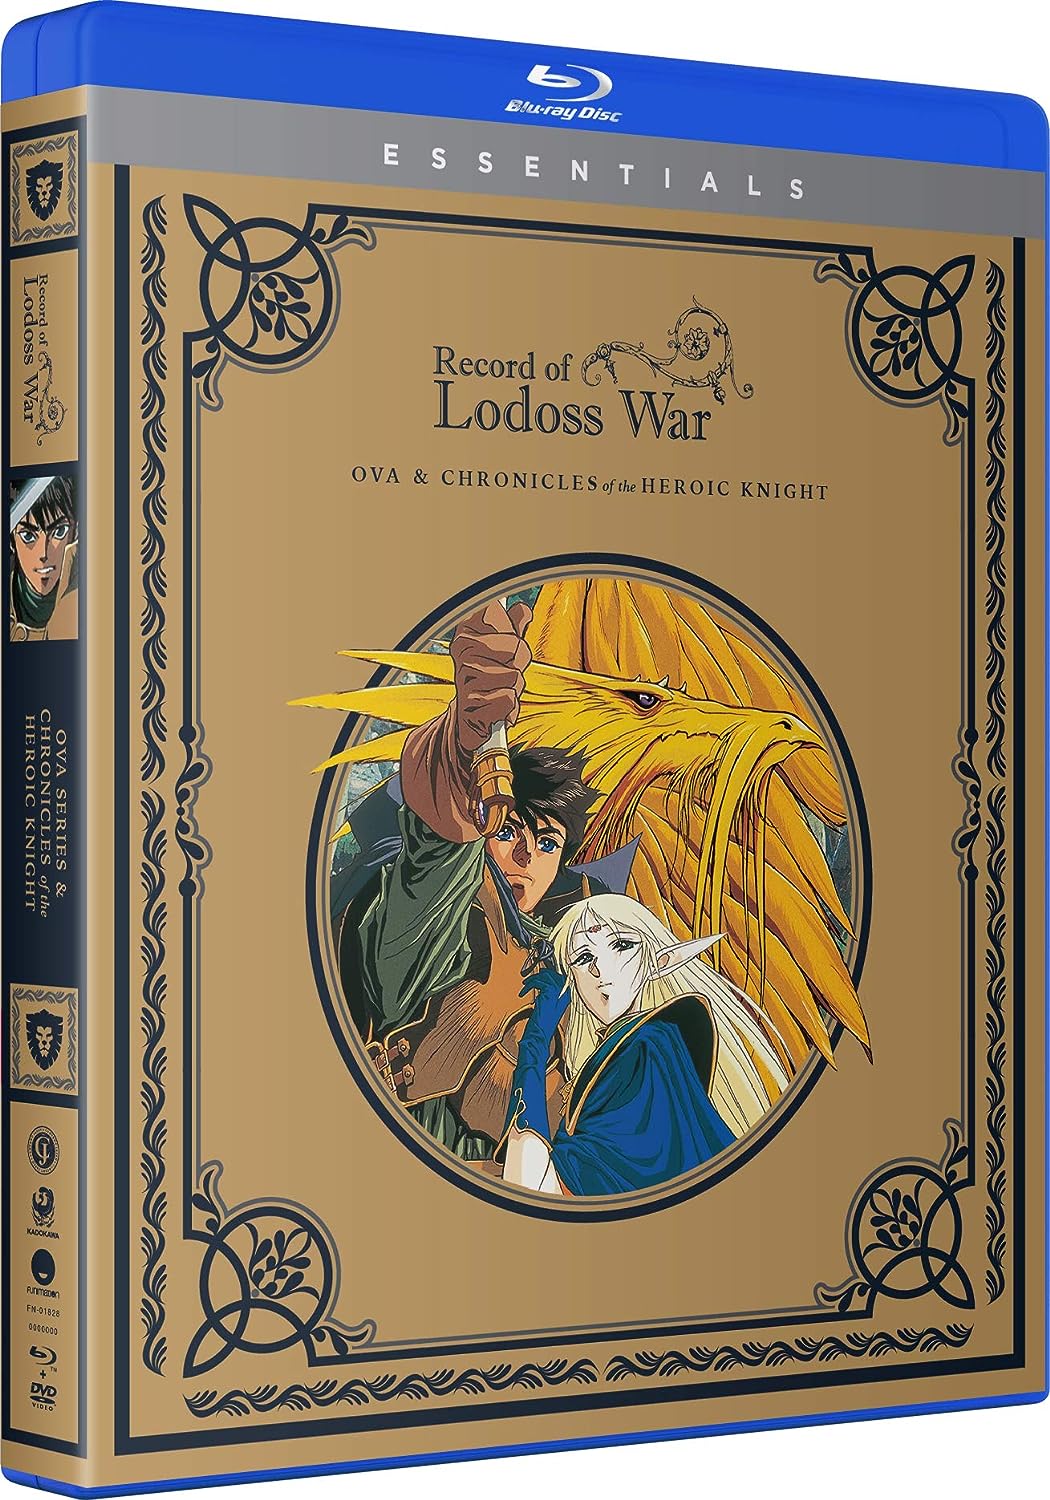 Record of Lodoss War: OVA & Chronicles of the Heroic Knight - The Complete Series | Blu-ray | Case